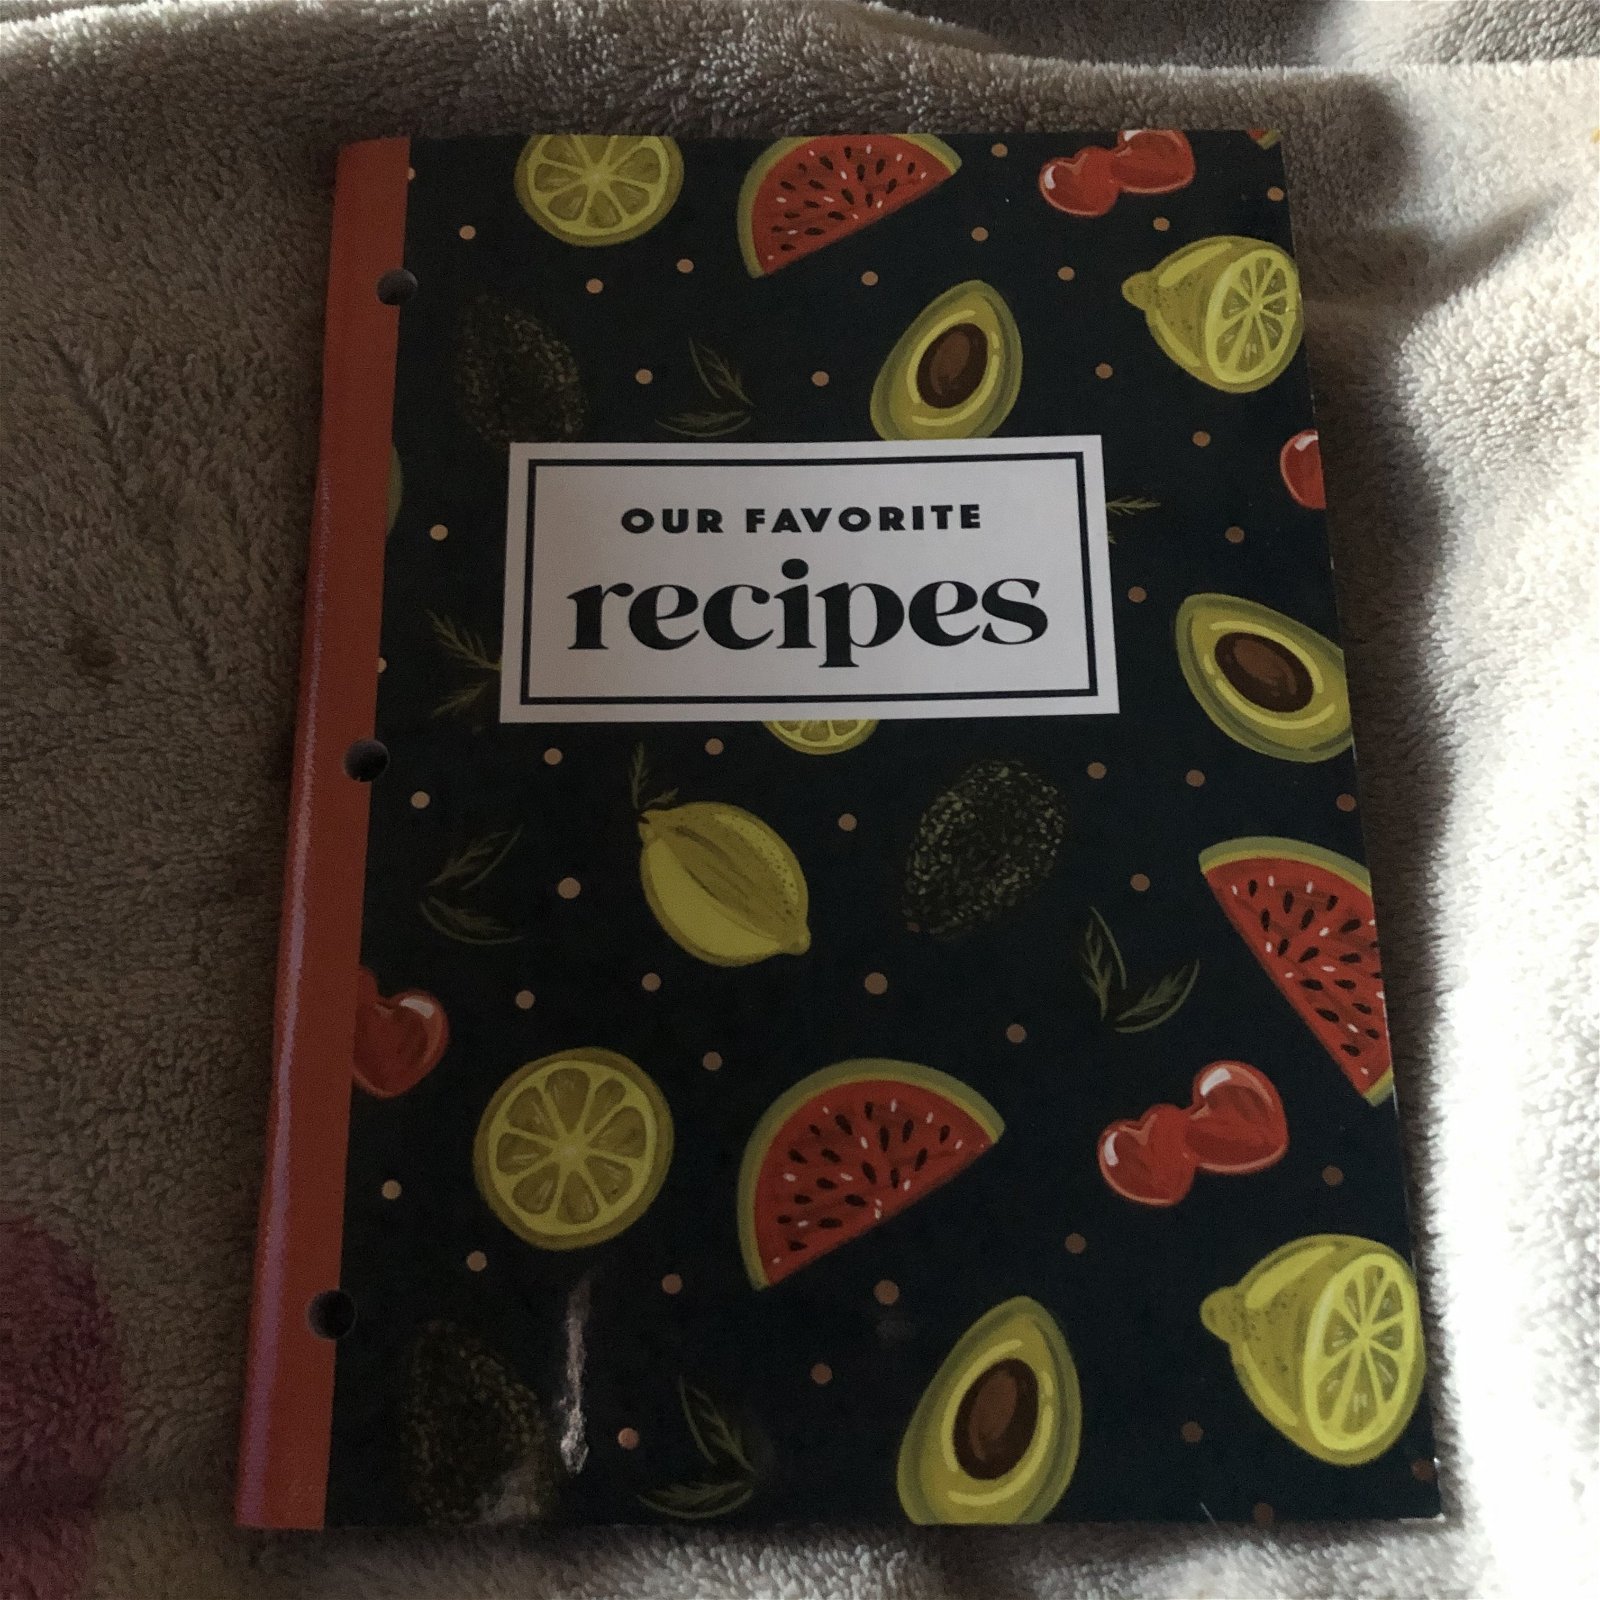 Photo by Luna Frost with the username @cannapoet, who is a star user,  April 8, 2020 at 5:50 PM and the text says 'Got this Wonderful Recipe Book to start a Family Cookbook with Favorite Recipes. I love to cook and Bake'